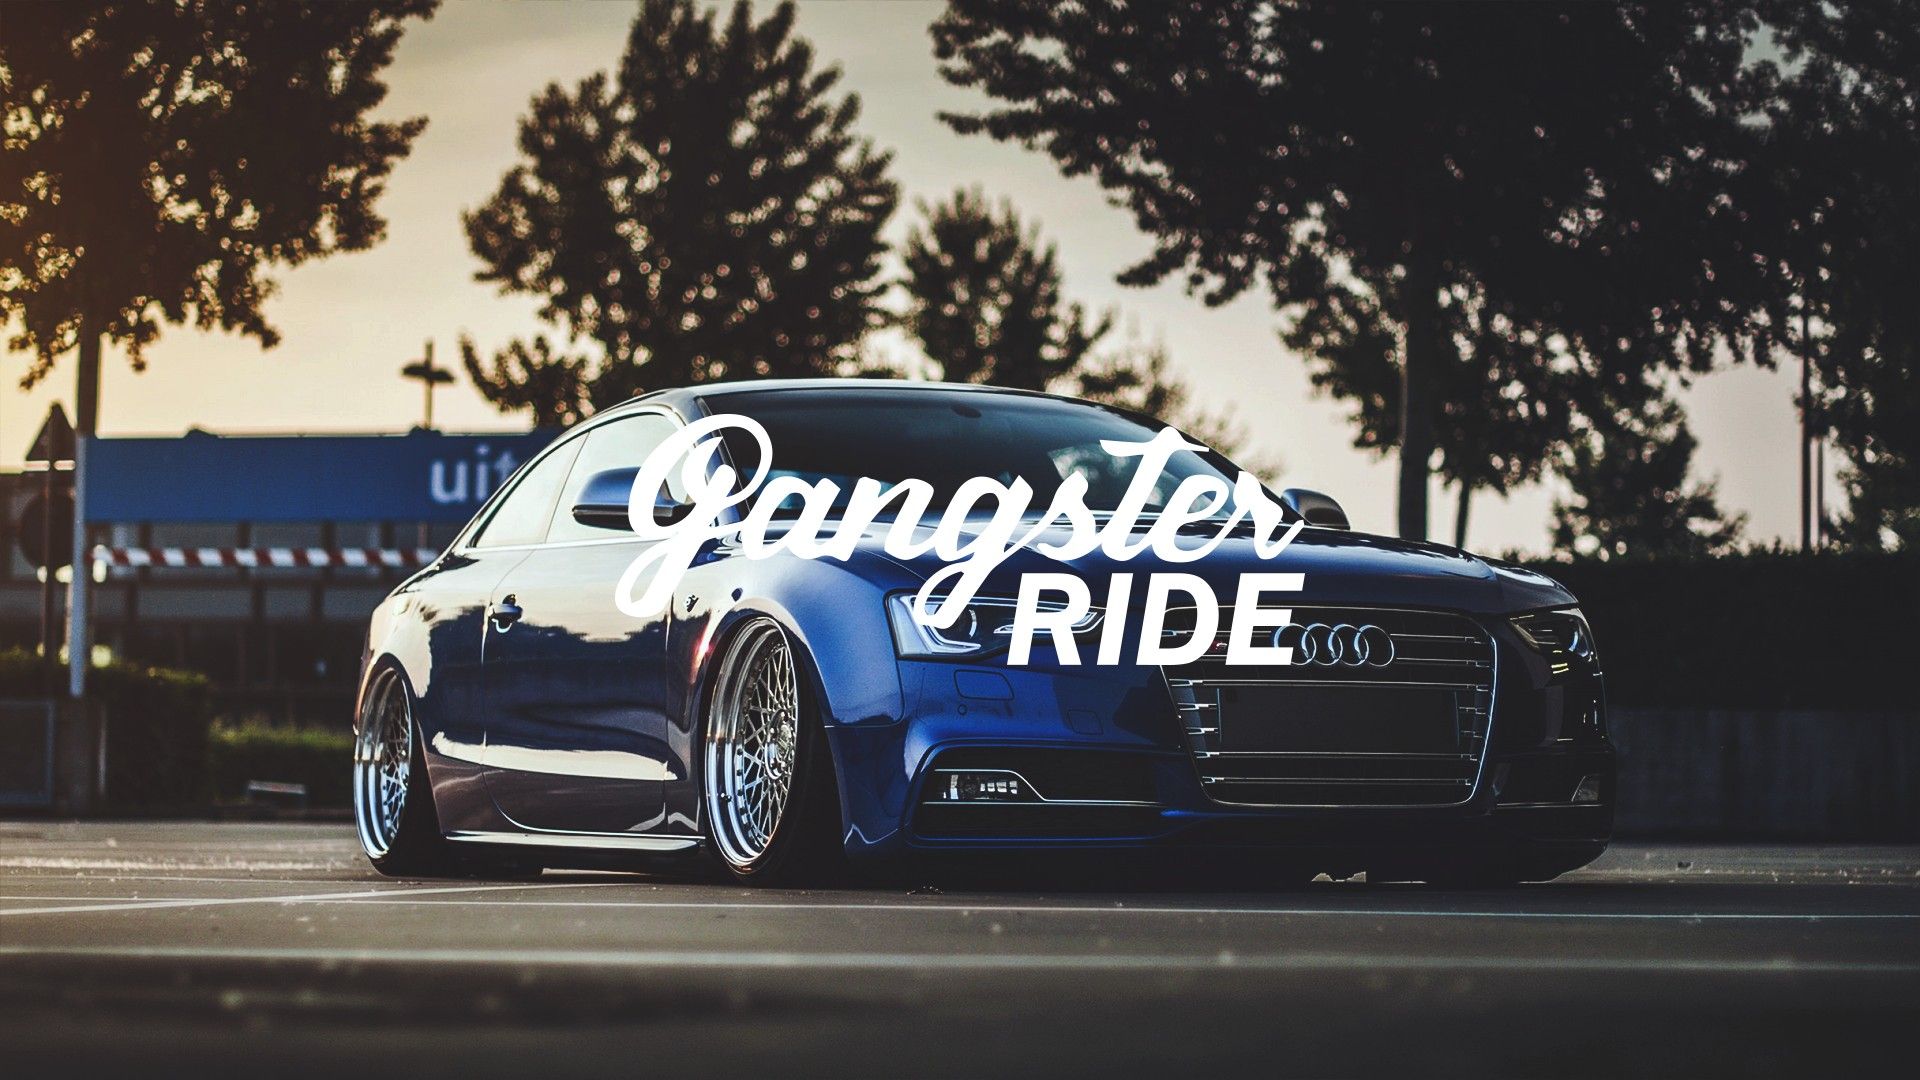 GANGSTER RIDE, Car, Tuning, Lowrider, Audi, Colorful, Stanced Wallpaper HD / Desktop and Mobile Background